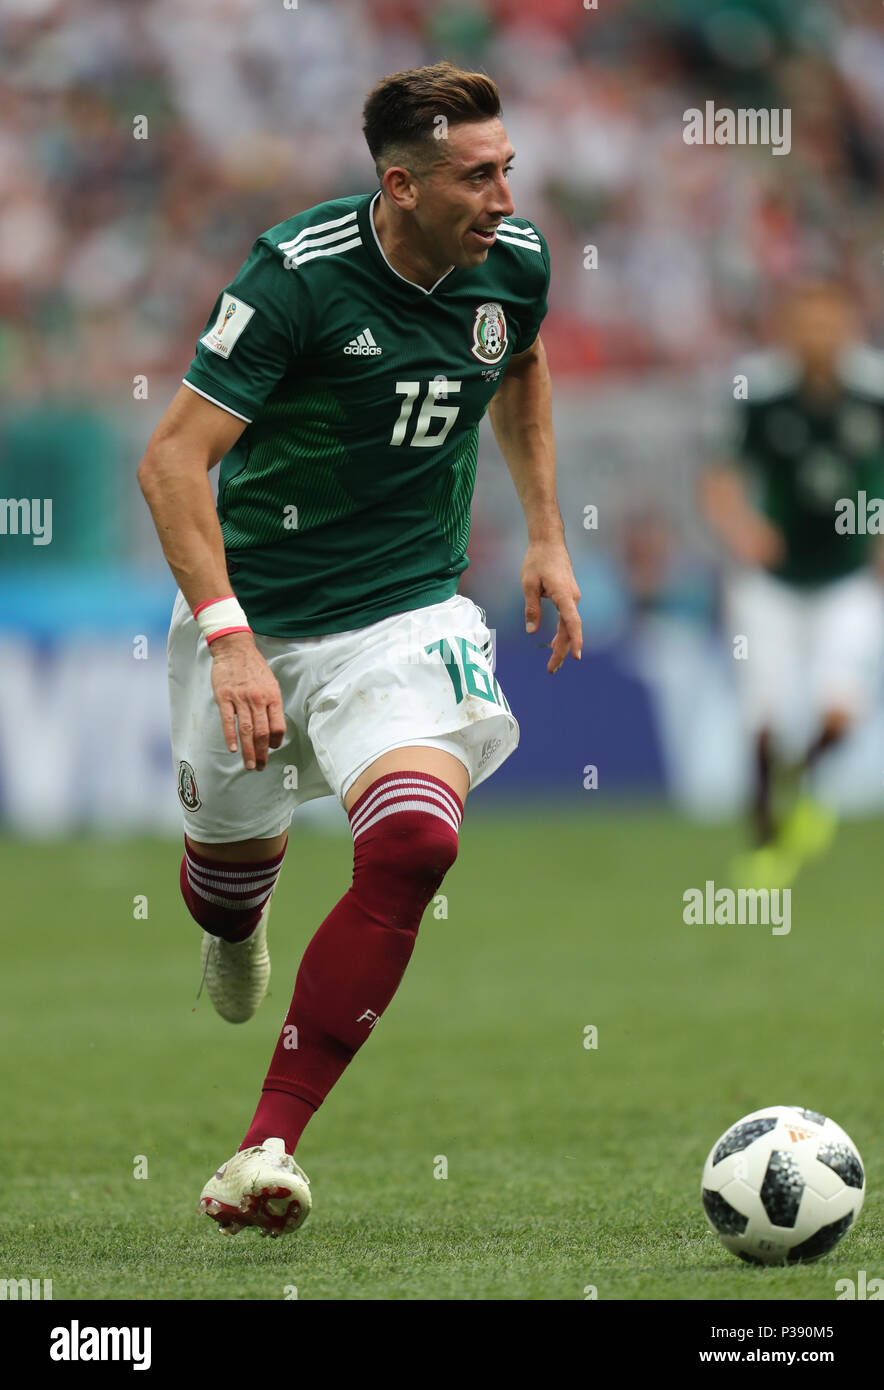 Hector Herrera MEXICO GERMANY V MEXICO, 2018 FIFA WORLD CUP RUSSIA 17 June 2018 GBC8286 Germany v Mexico 2018 FIFA World Cup Russia STRICTLY EDITORIAL USE ONLY. If The Player/Players Depicted In This Image Is/Are Playing For An English Club Or The England National Team. Then This Image May Only Be Used For Editorial Purposes. No Commercial Use. The Following Usages Are Also Restricted EVEN IF IN AN EDITORIAL CONTEXT: Use in conjuction with, or part of, any unauthorized audio, video, data, fixture lists, club/league logos, Betting, Games or any 'live' services. Also Restri Stock Photo